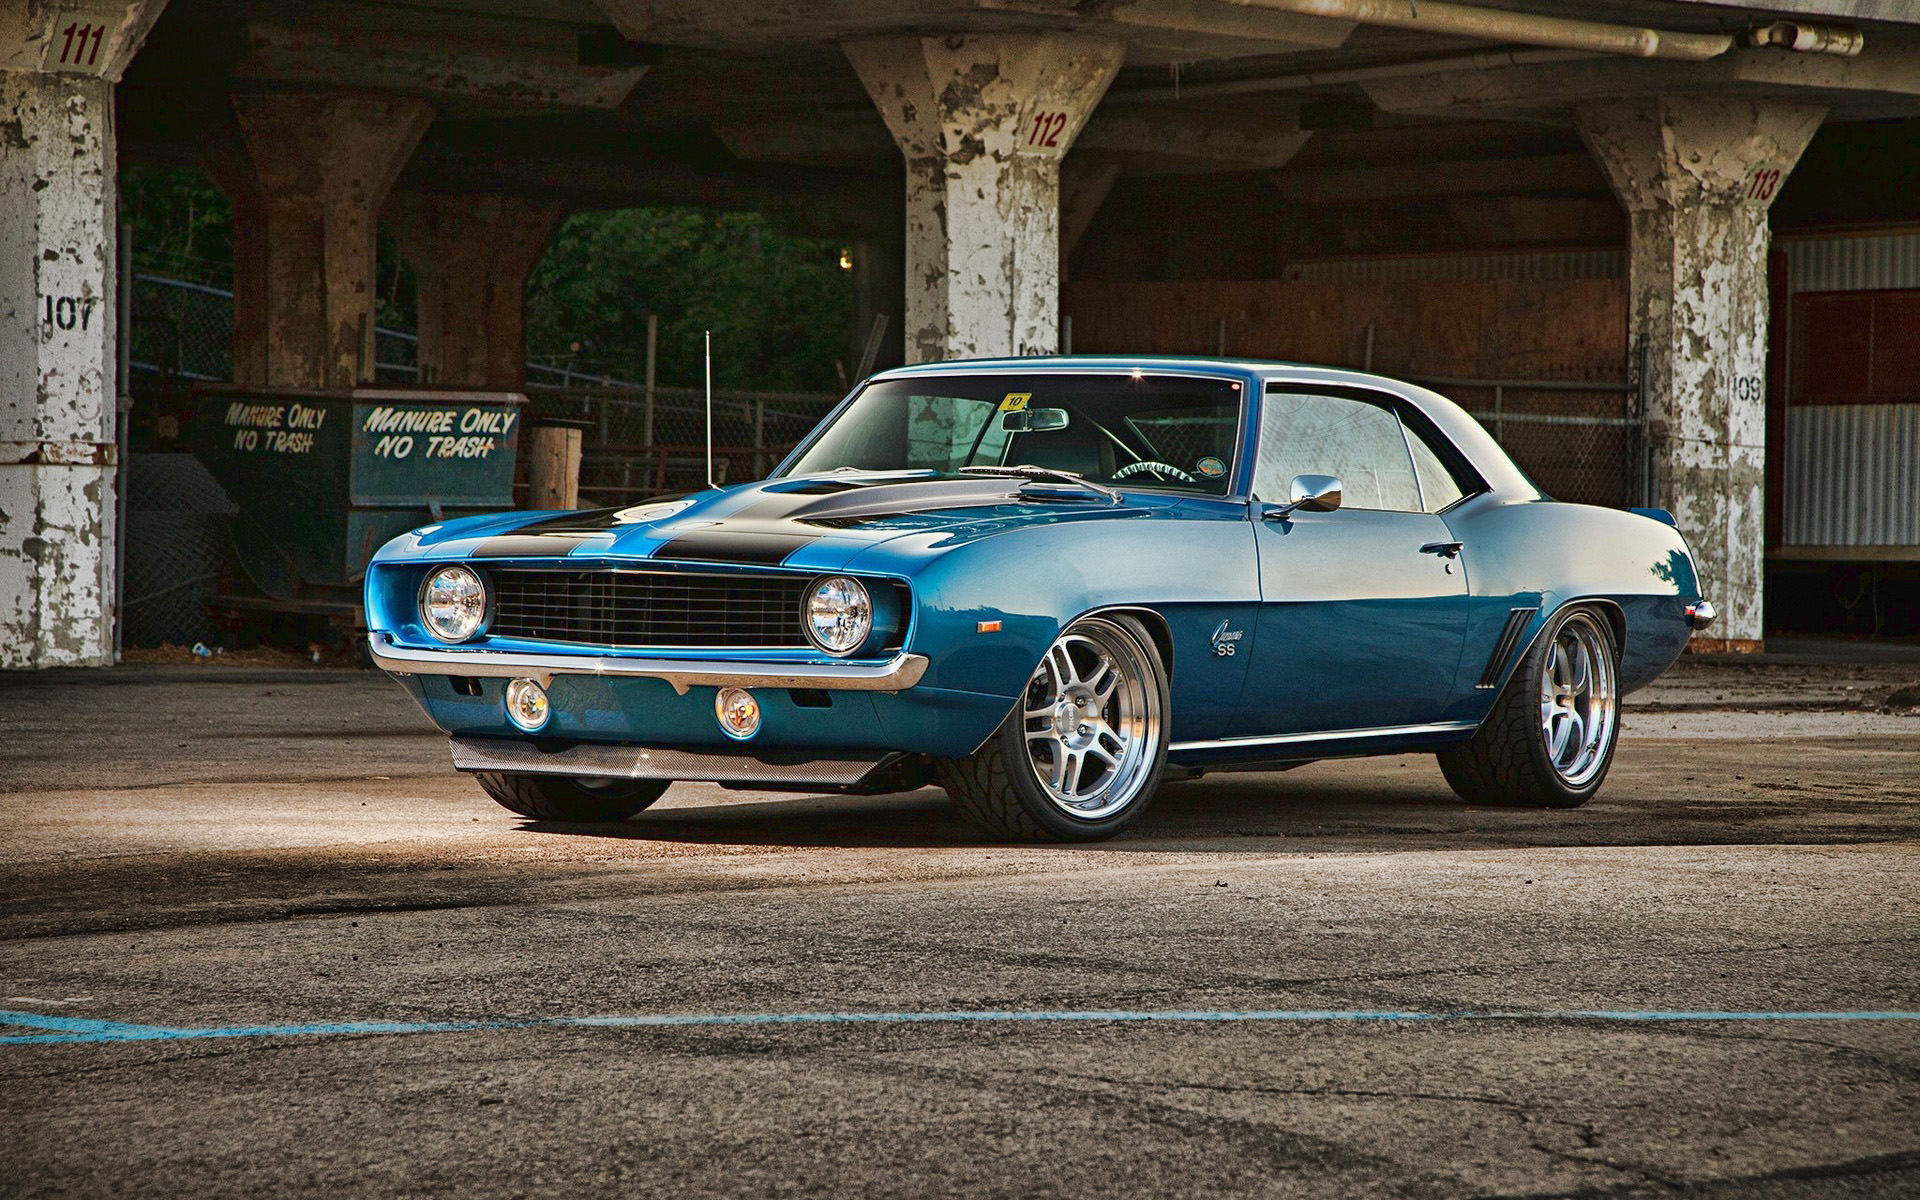 Download wallpapers Chevrolet Camaro SS, muscle cars, 1969 cars, tuning,  retro cars, blue Camaro, Customized Chevrolet Camaro, american cars,  Chevrolet for desktop with resolution 1920x1200. High Quality HD pictures  wallpapers